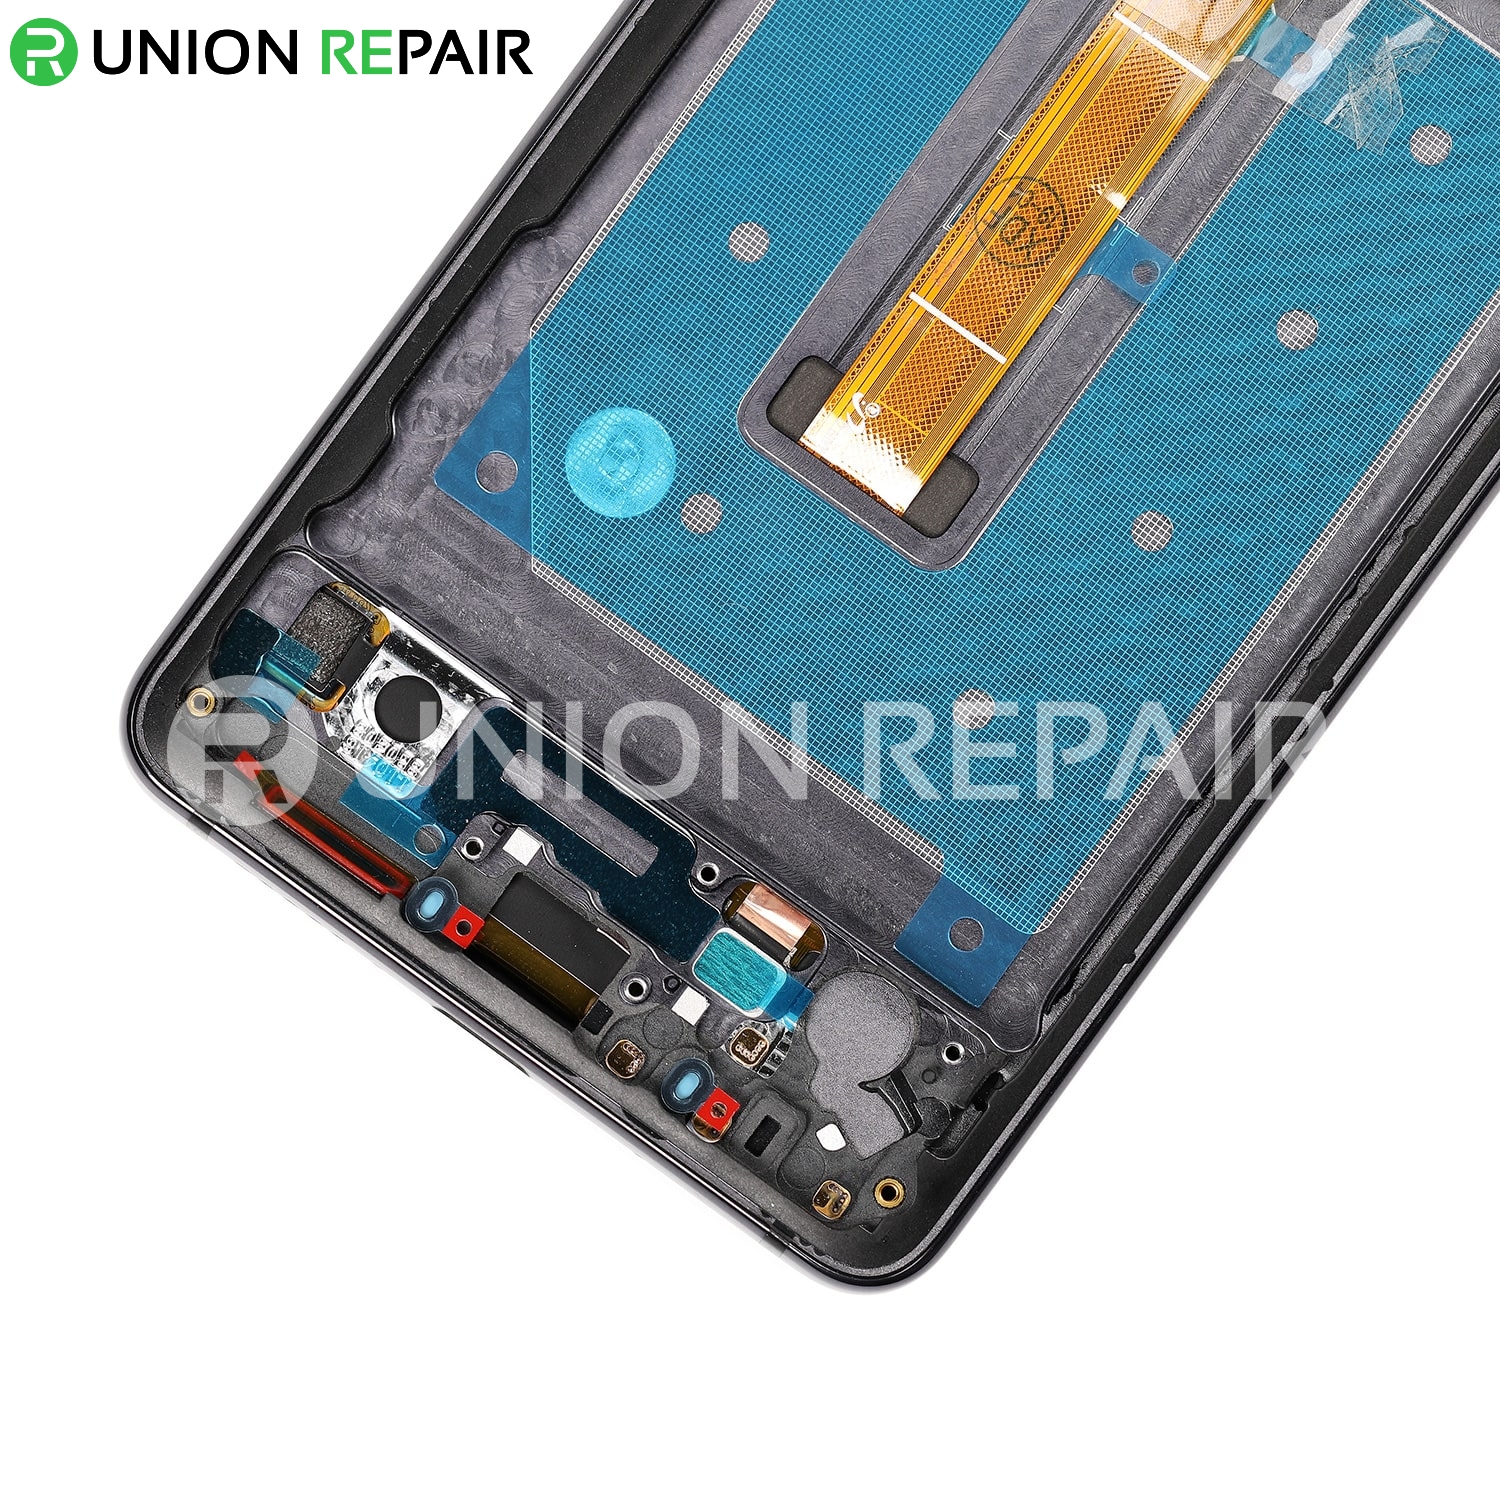 Replacement for Huawei Mate 10 Pro LCD Screen Digitizer Assembly with Frame - Titanium Grey